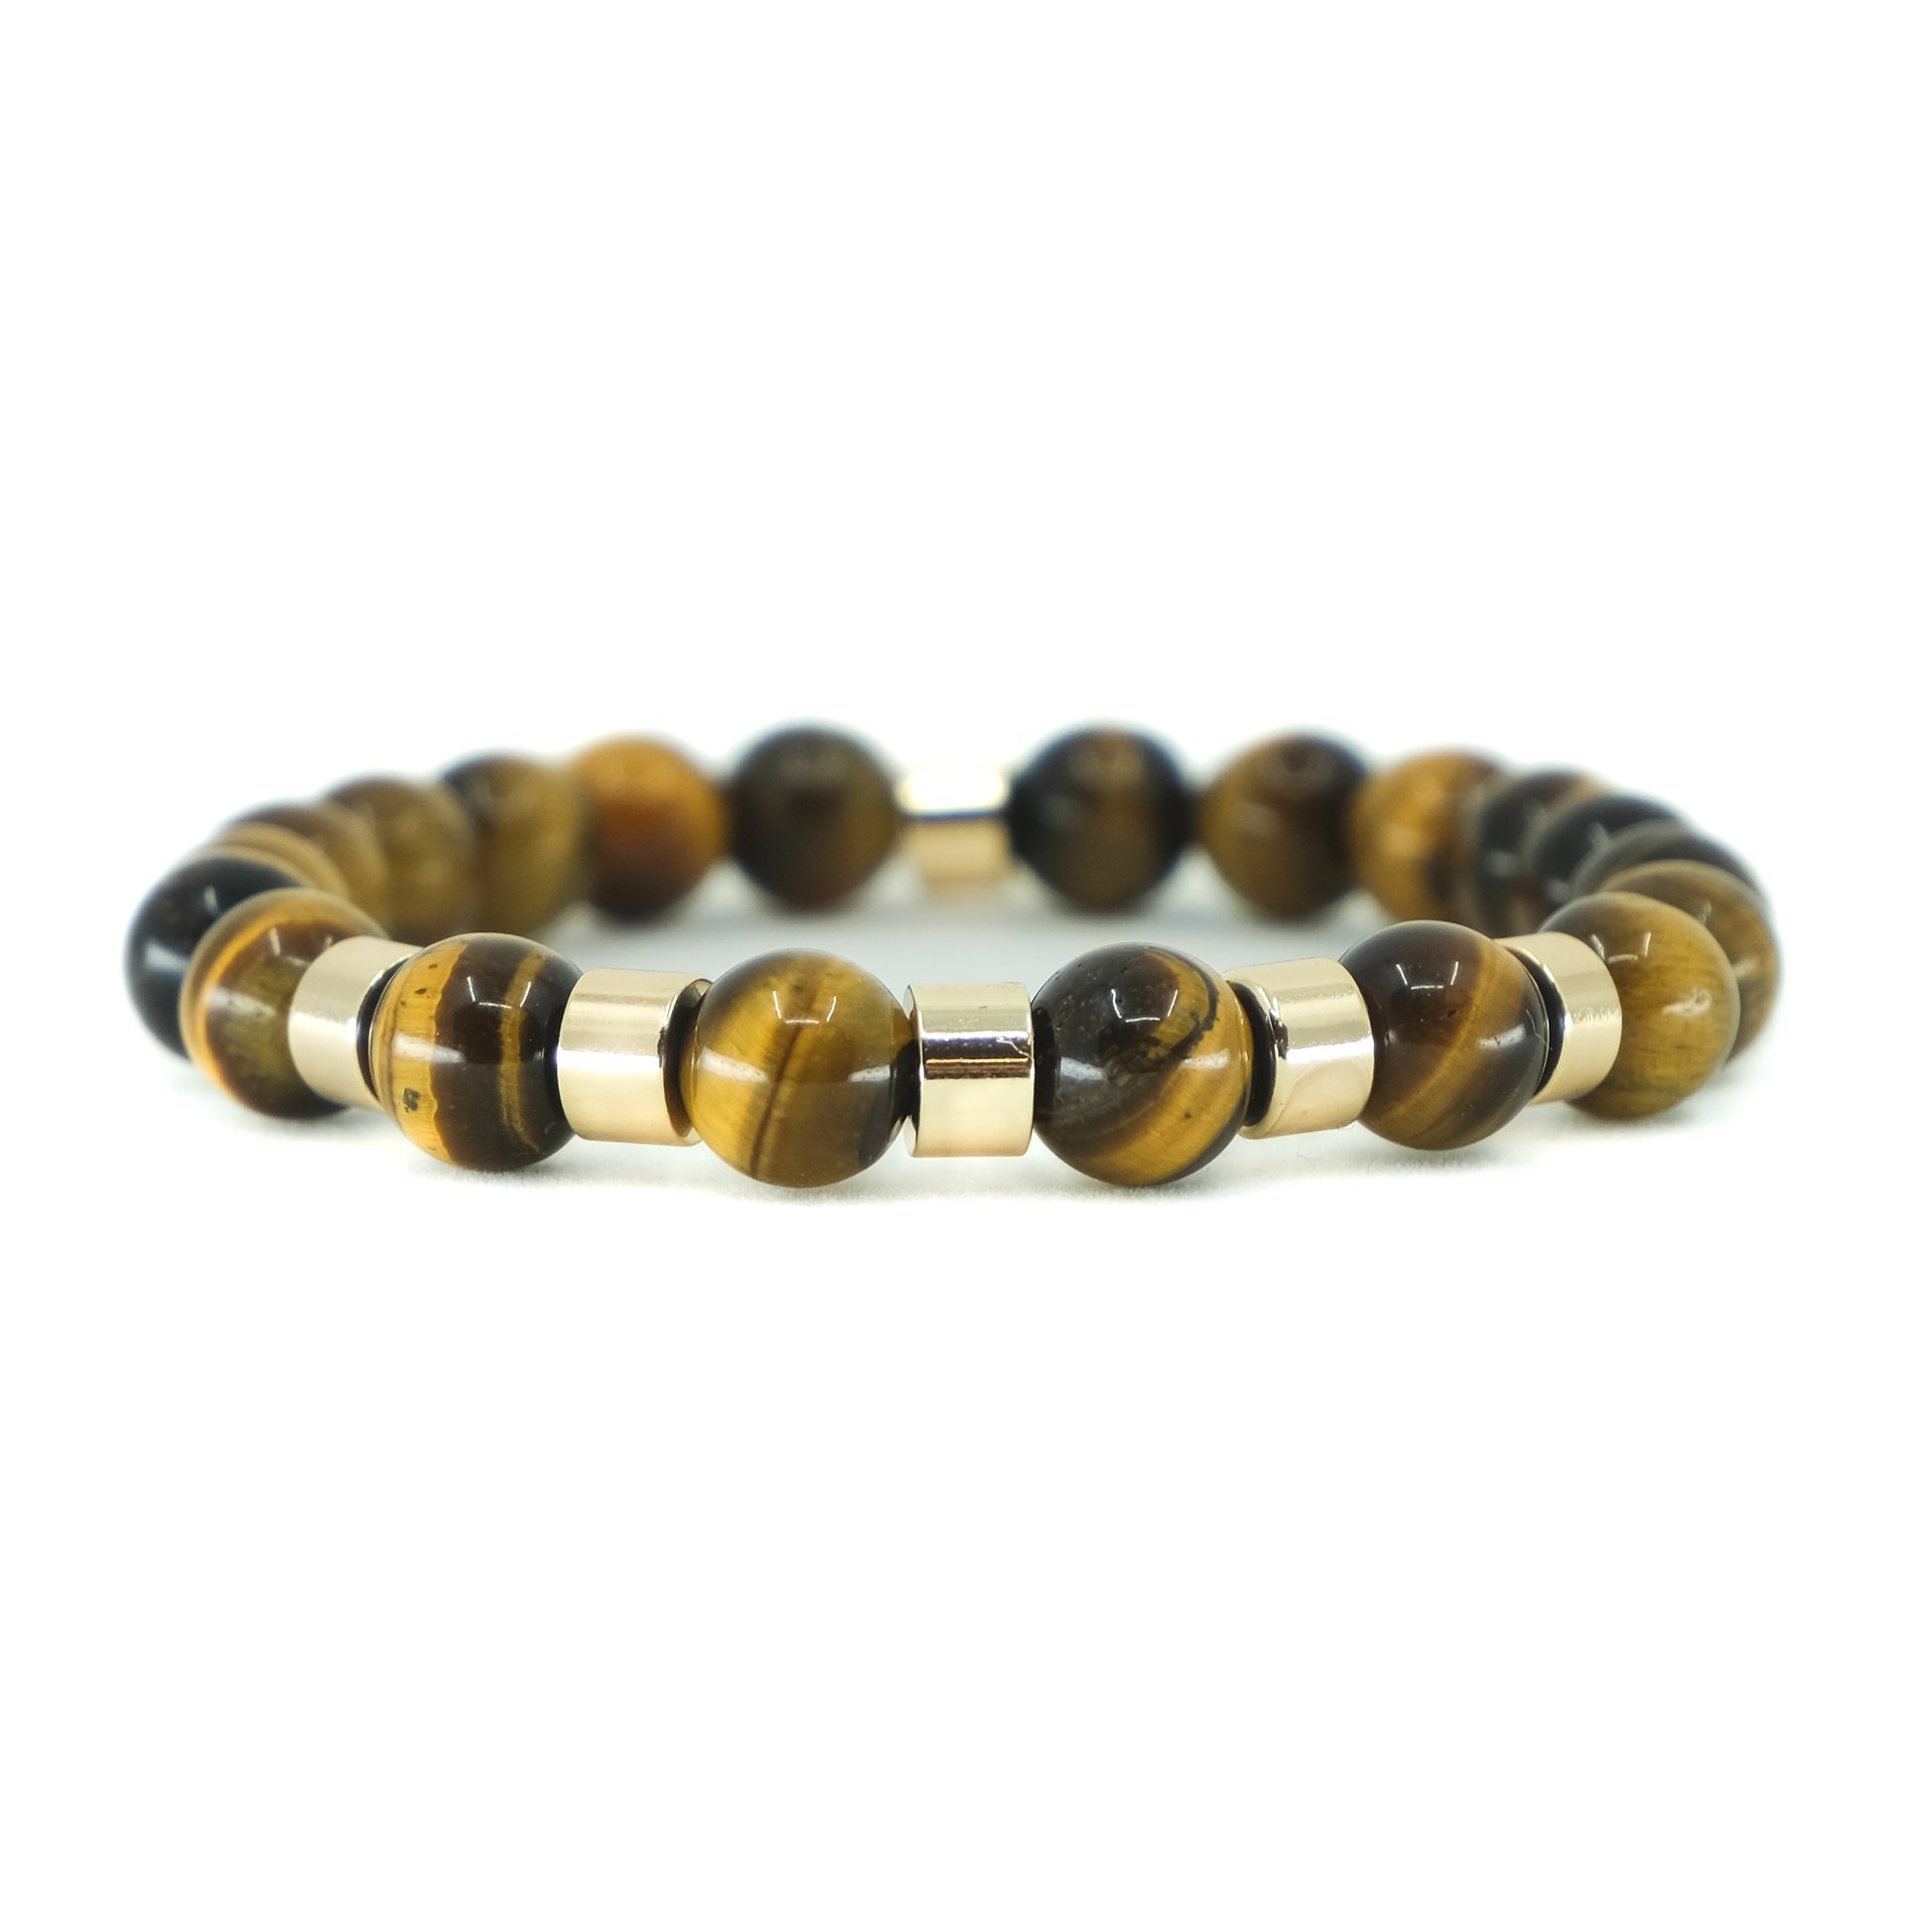 Tiger Eye gemstone bracelet in 8mm beads with gold accessories